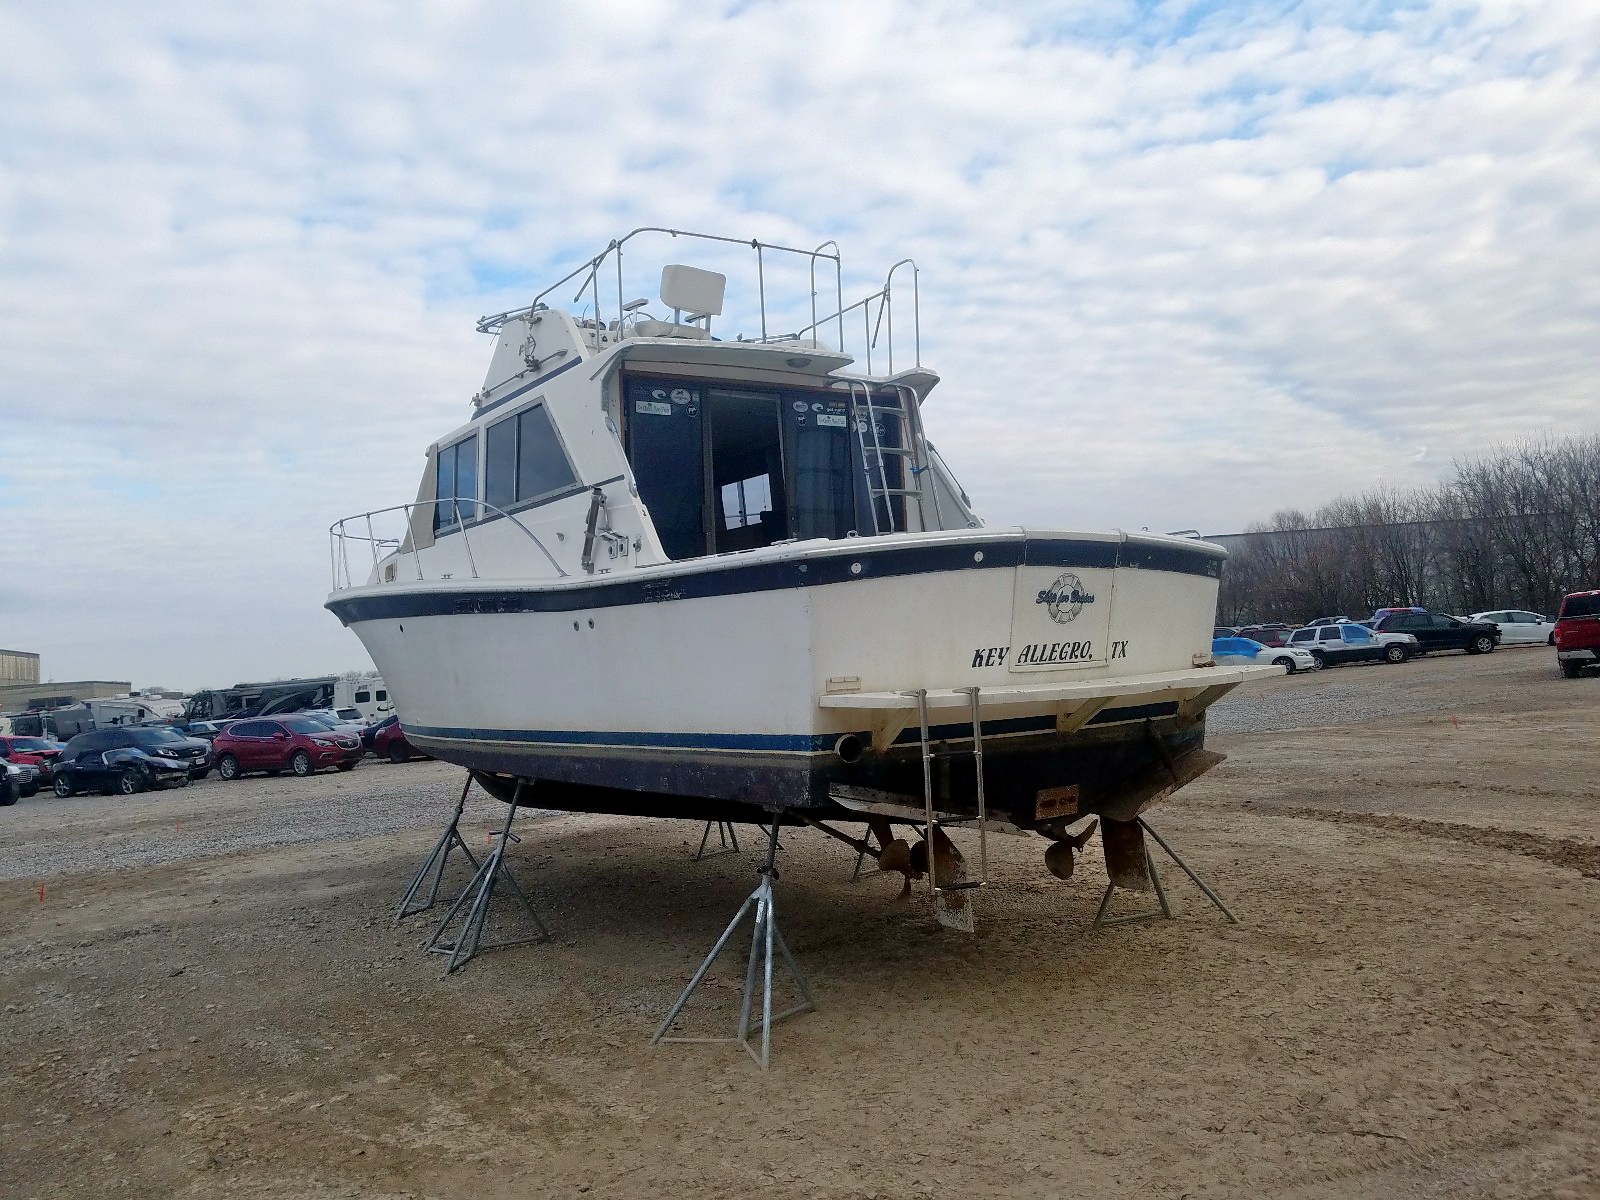 salvage yacht auctions